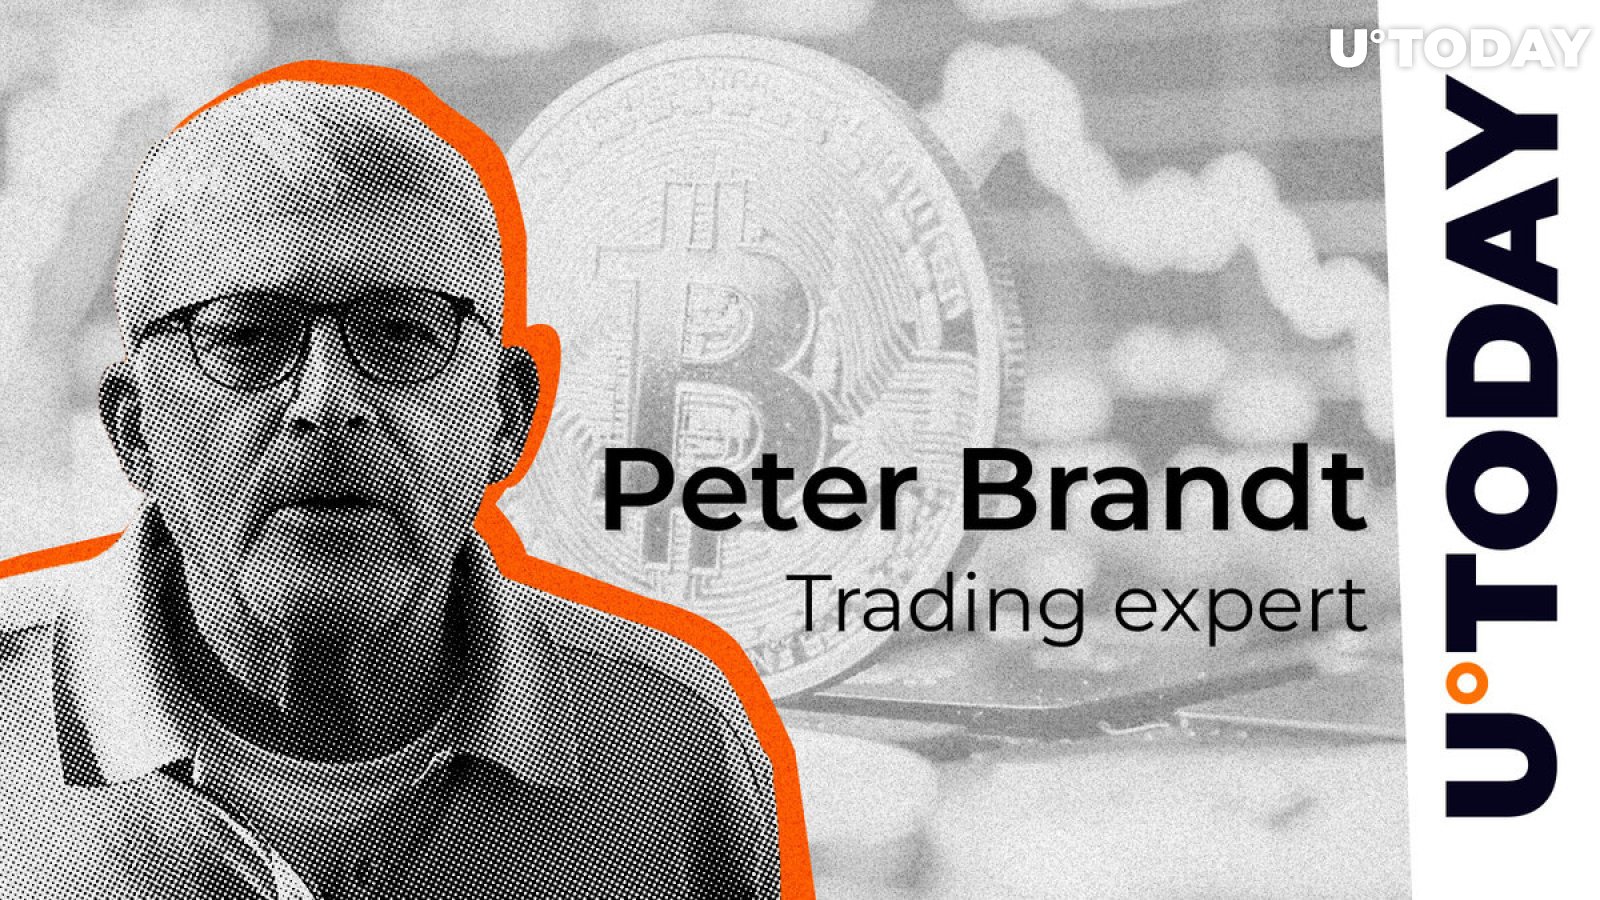 Legendary Trader Peter Brandt Exposes Worrying Bitcoin Price Pattern